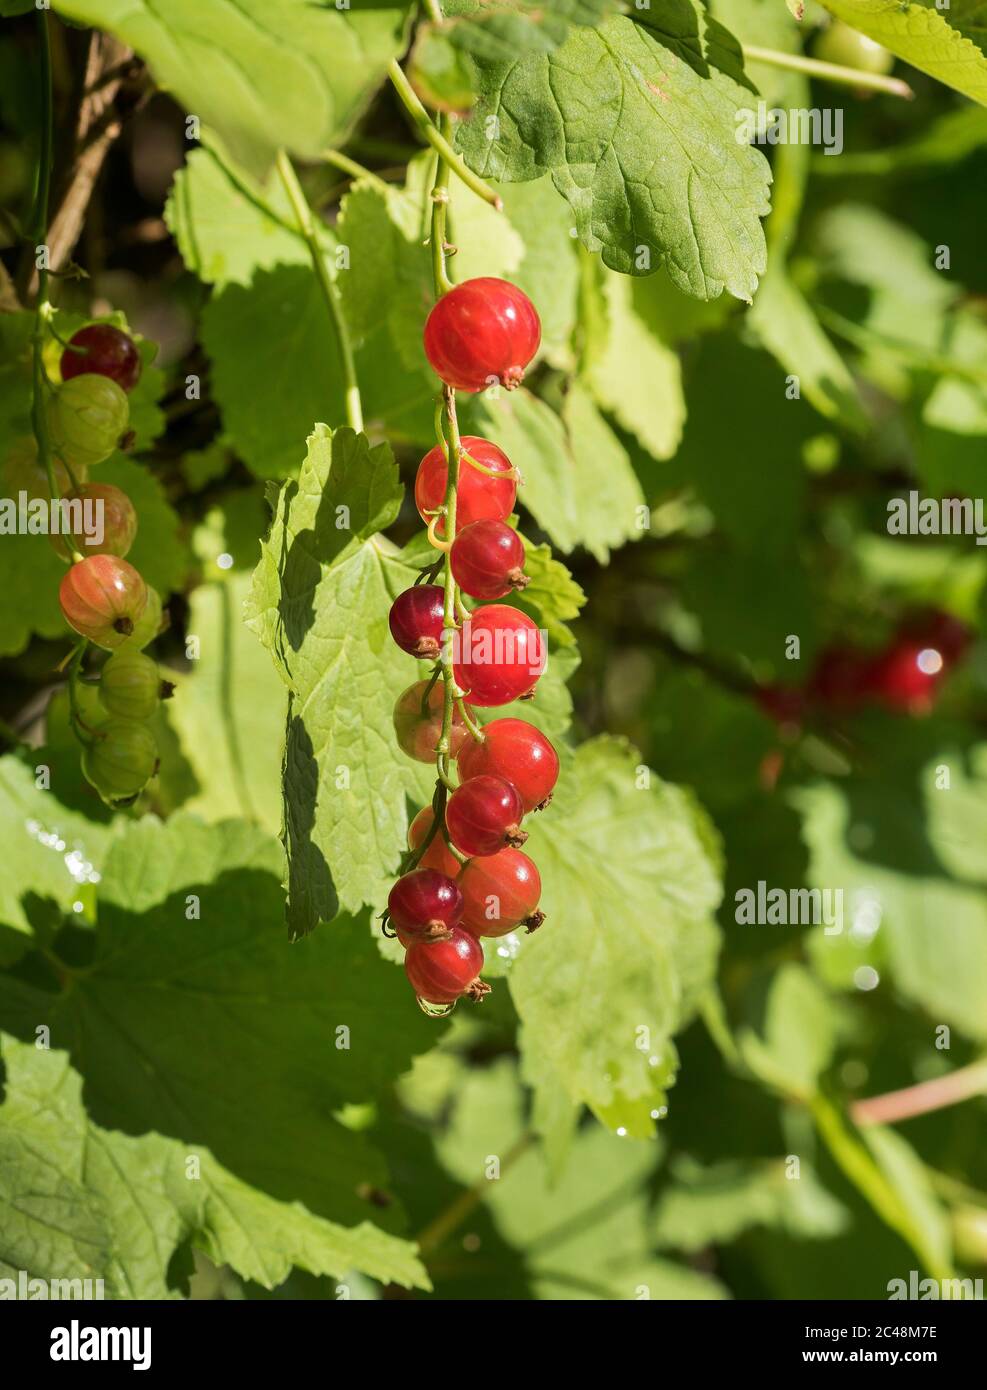 The redcurrant, or red currant, Ribes rubrum, ripe berries on shrub Stock Photo